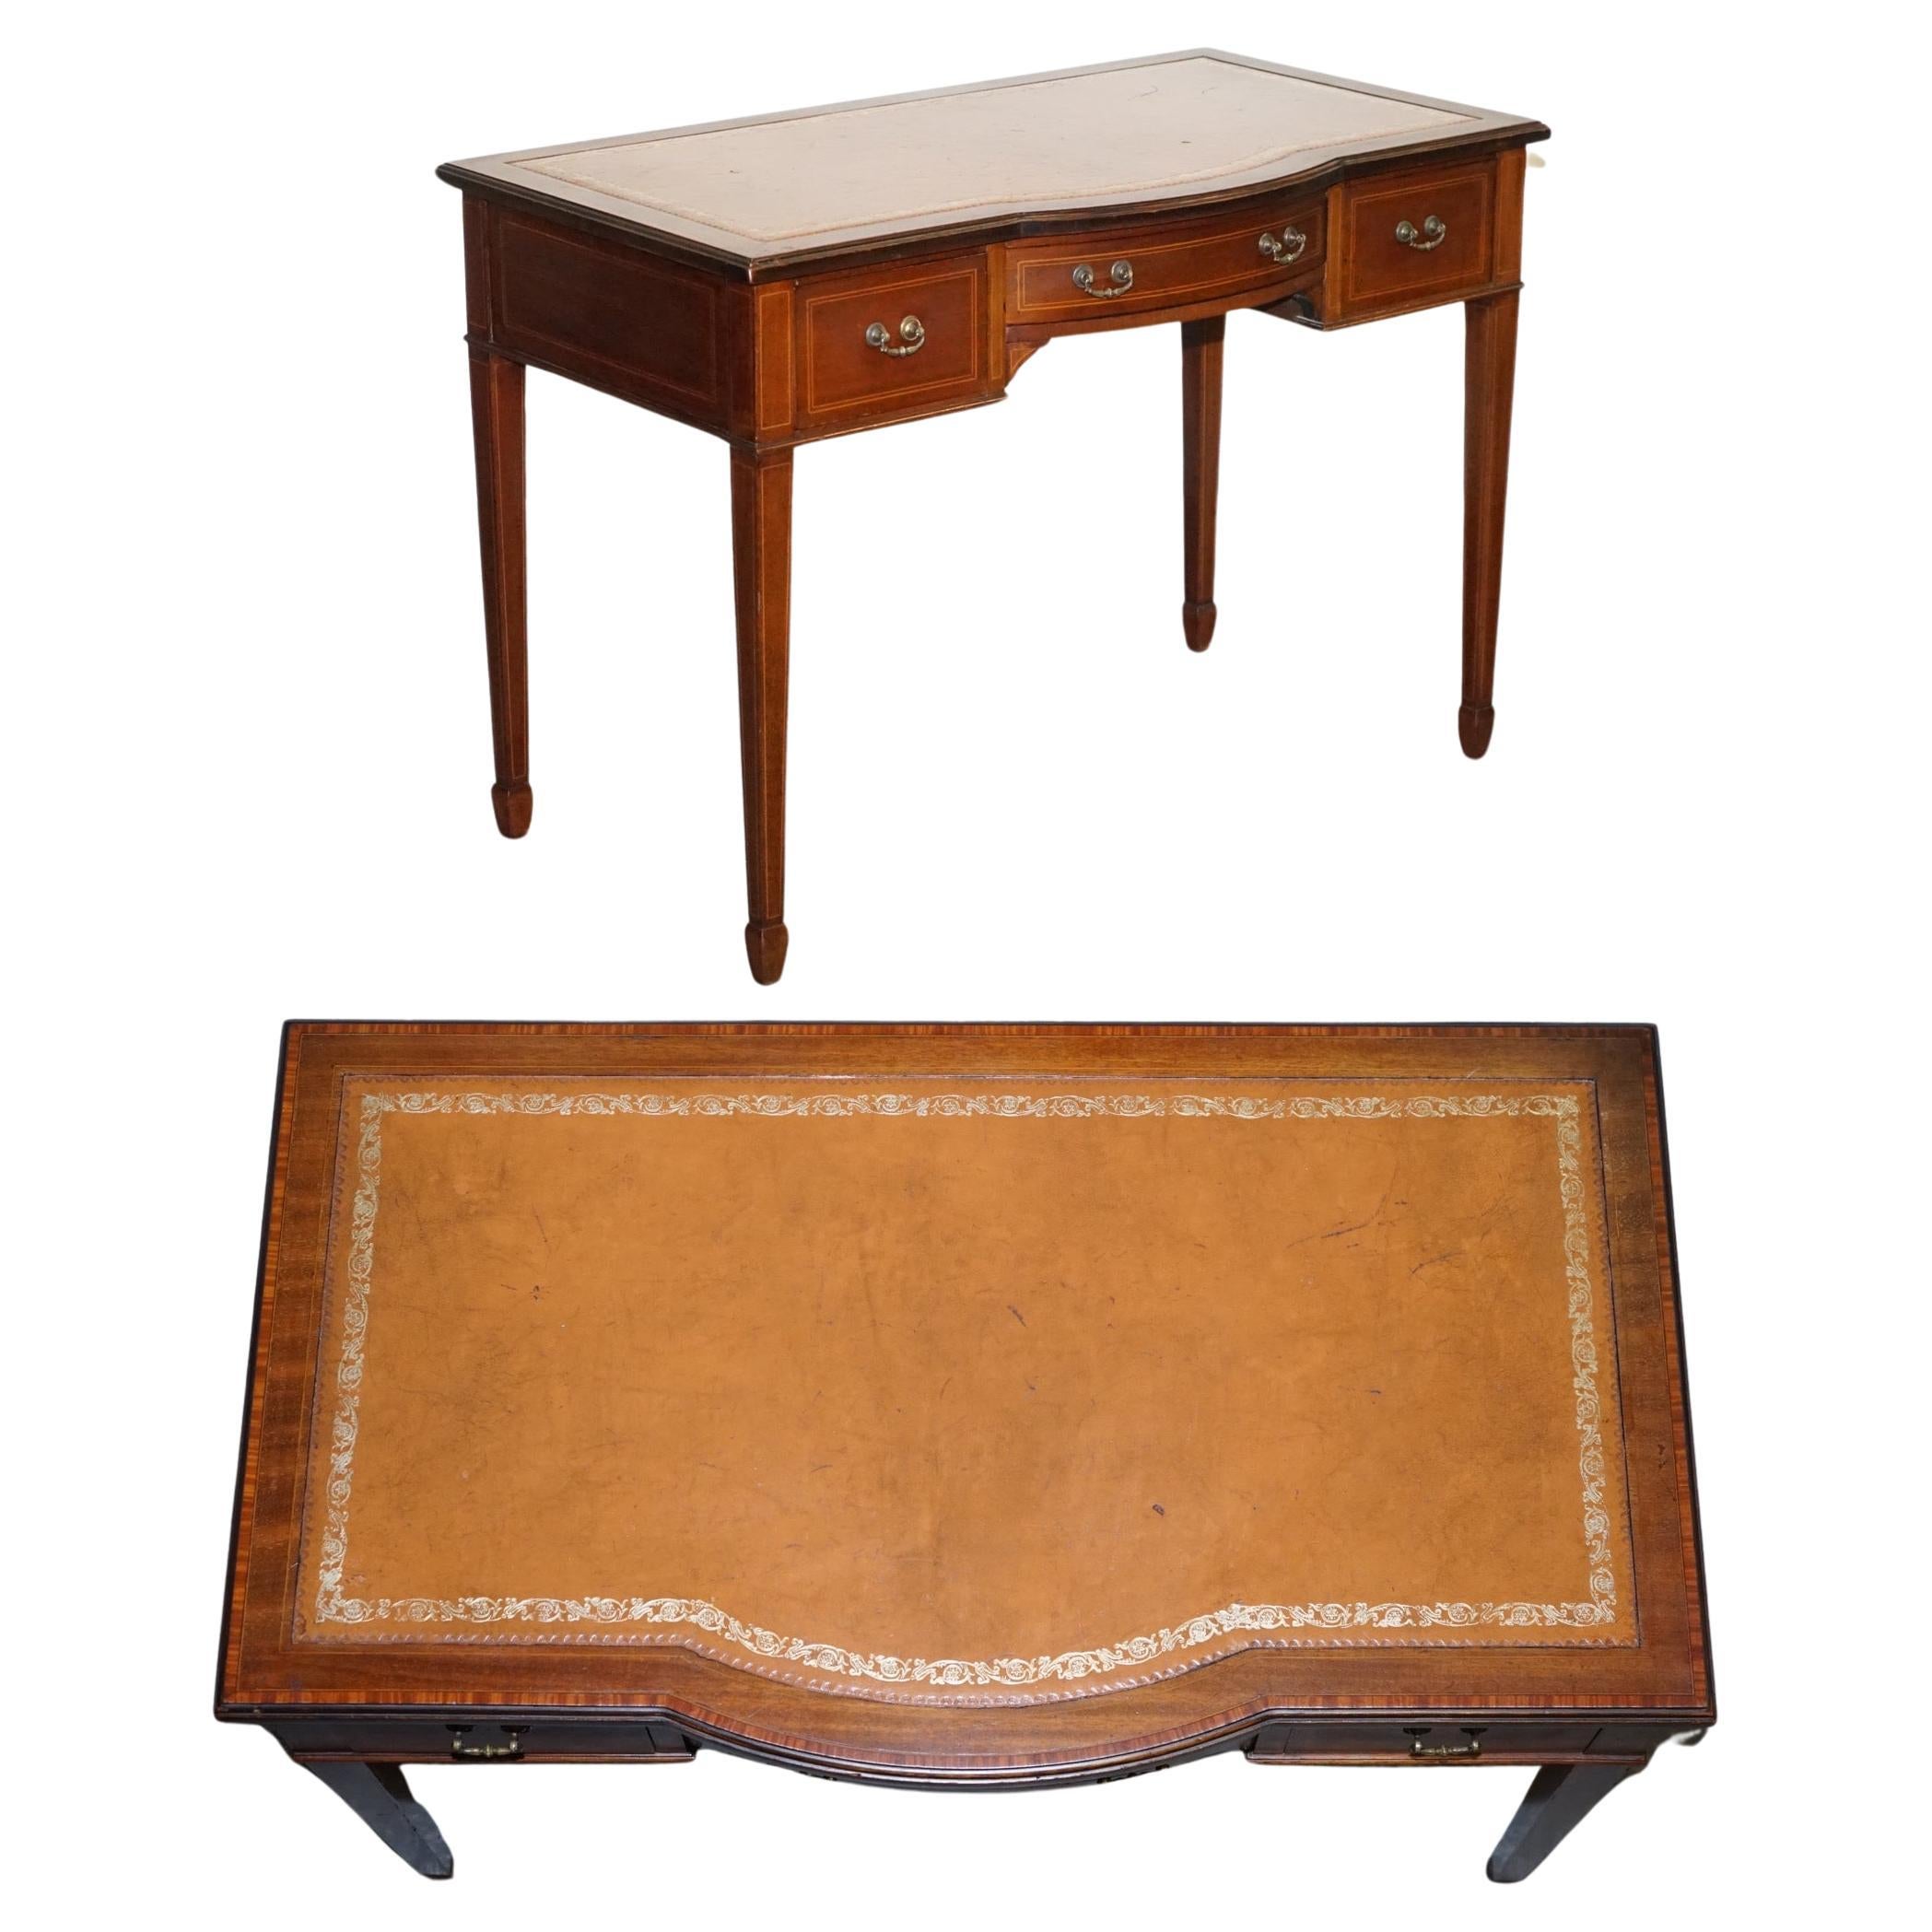 EDWARDIAN 1880 STAMPED MAPLE & CO BROWN LEATHER SHERATON WRITING DESK TABLE 